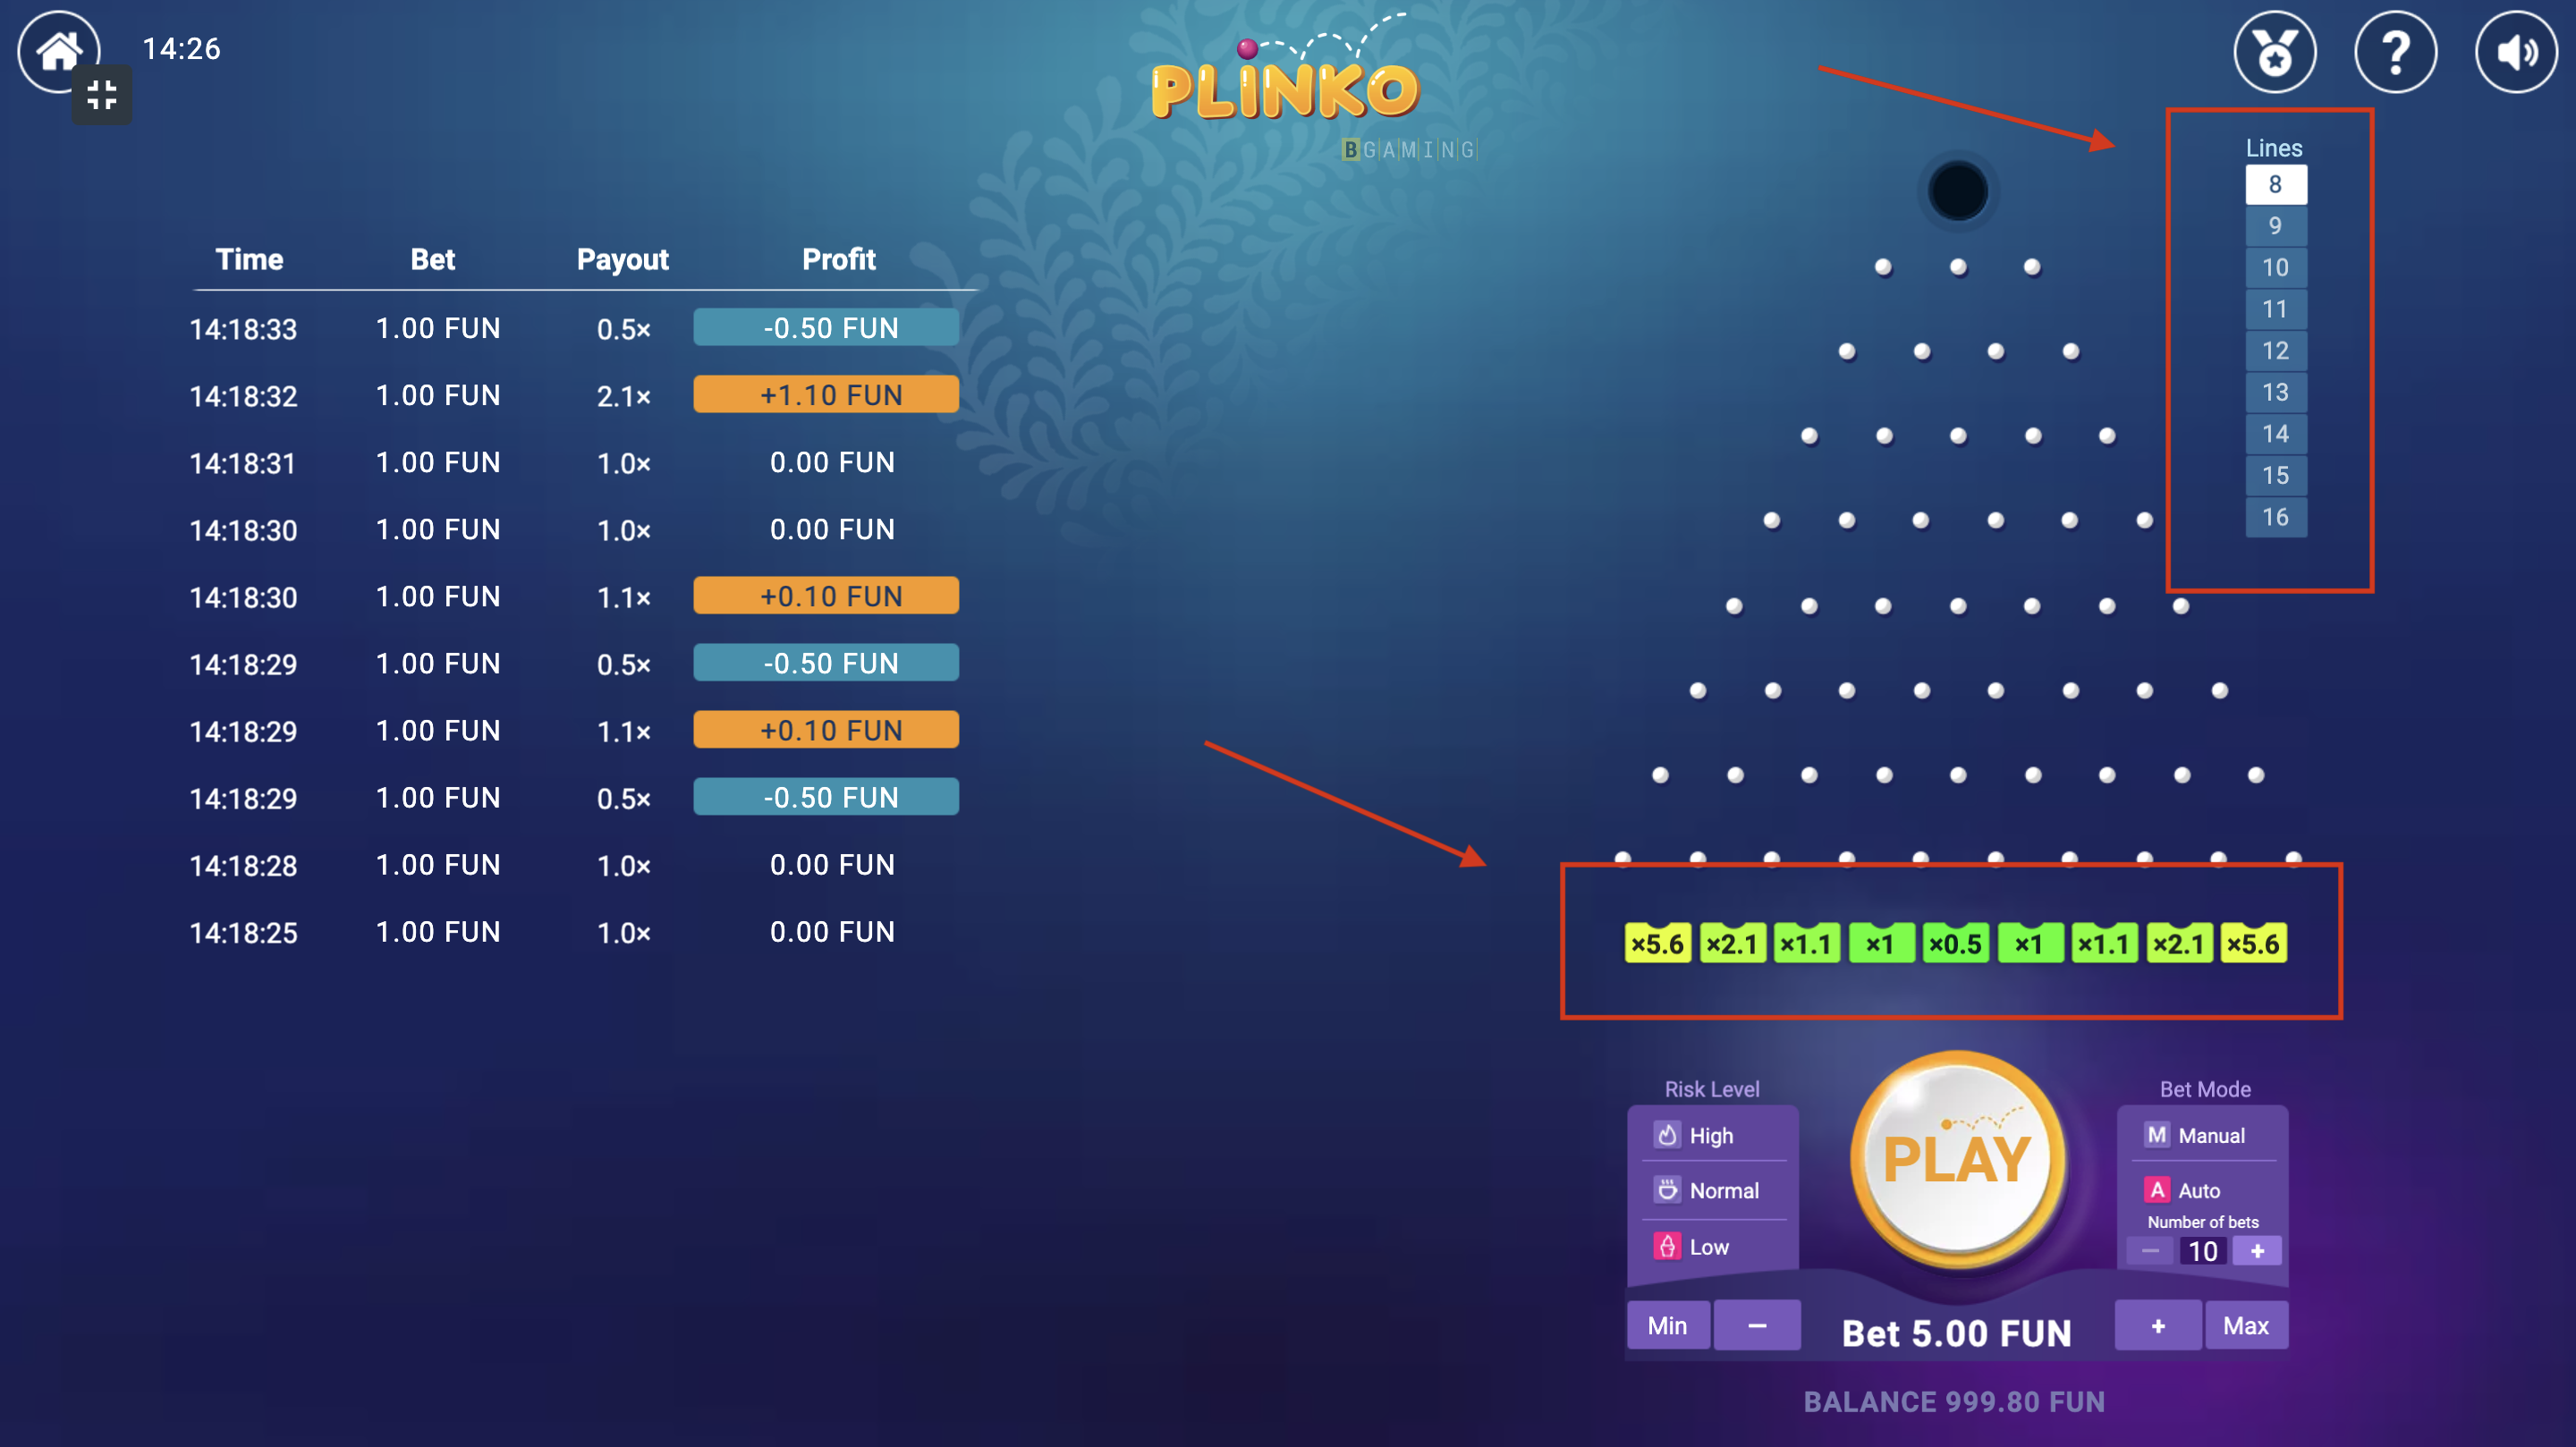 Plinko casino | What are the main elements of the game board? 